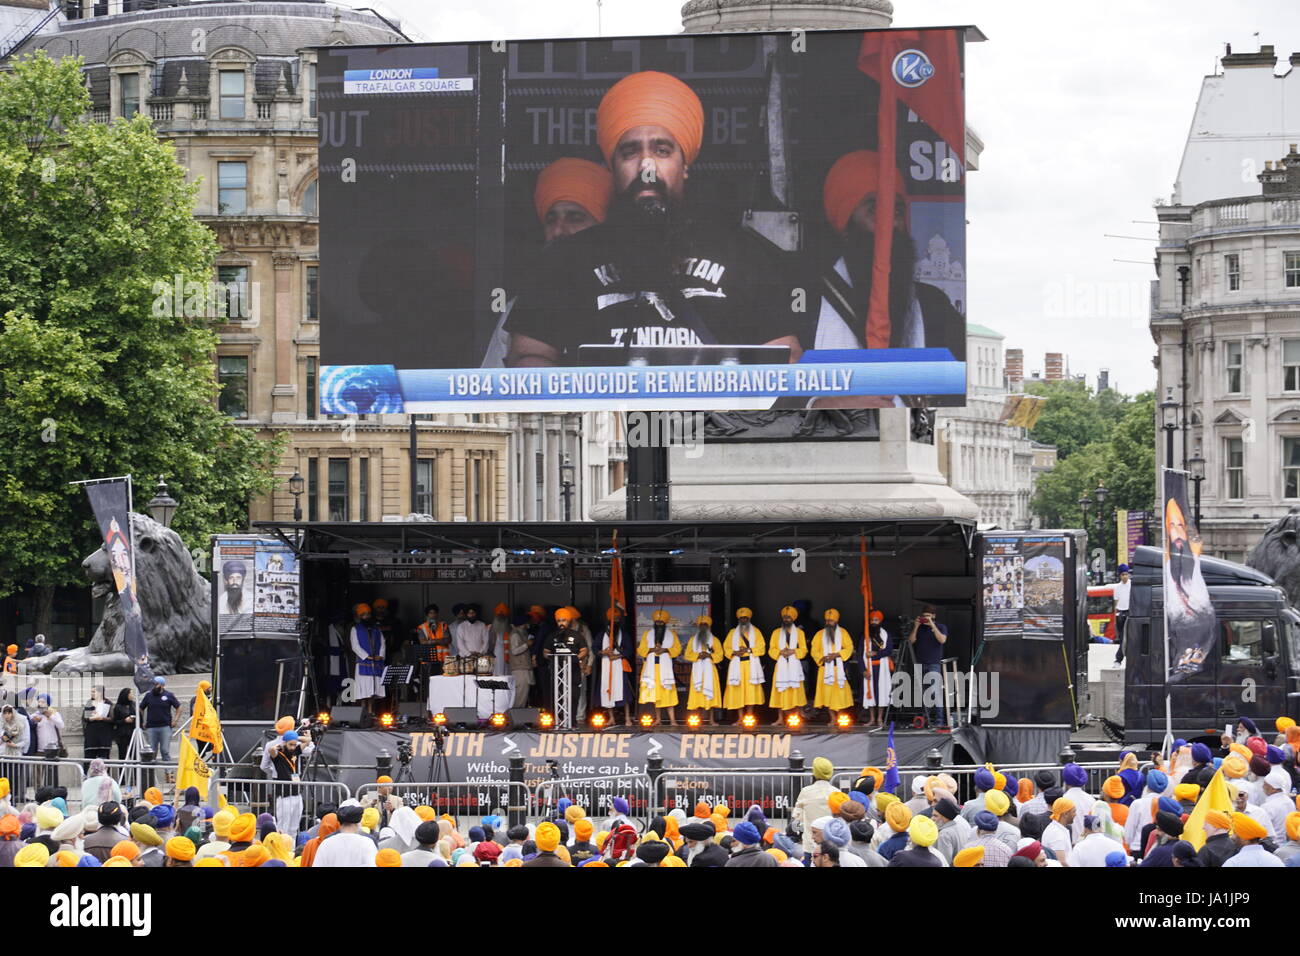 A day after the London terrorist attach, Sikhs gather in Trafalgar Square to commemorate the massacre at the Golden Temple in 1984 Stock Photo